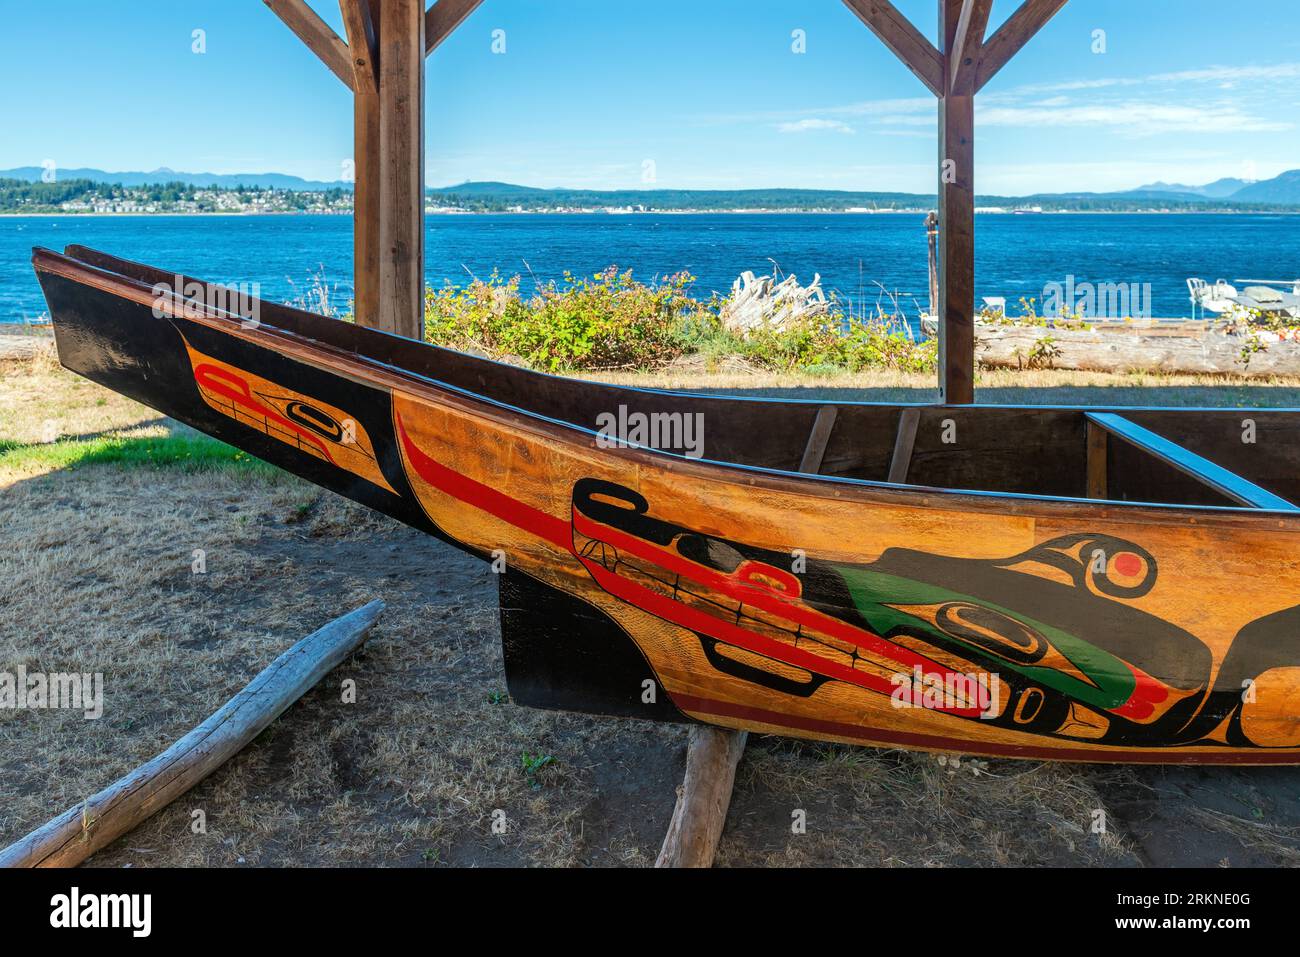 Traditional canoe of the We Wai Kai first nation native people in the village of Cape Mudge, Quadra Island, Canada. Stock Photo